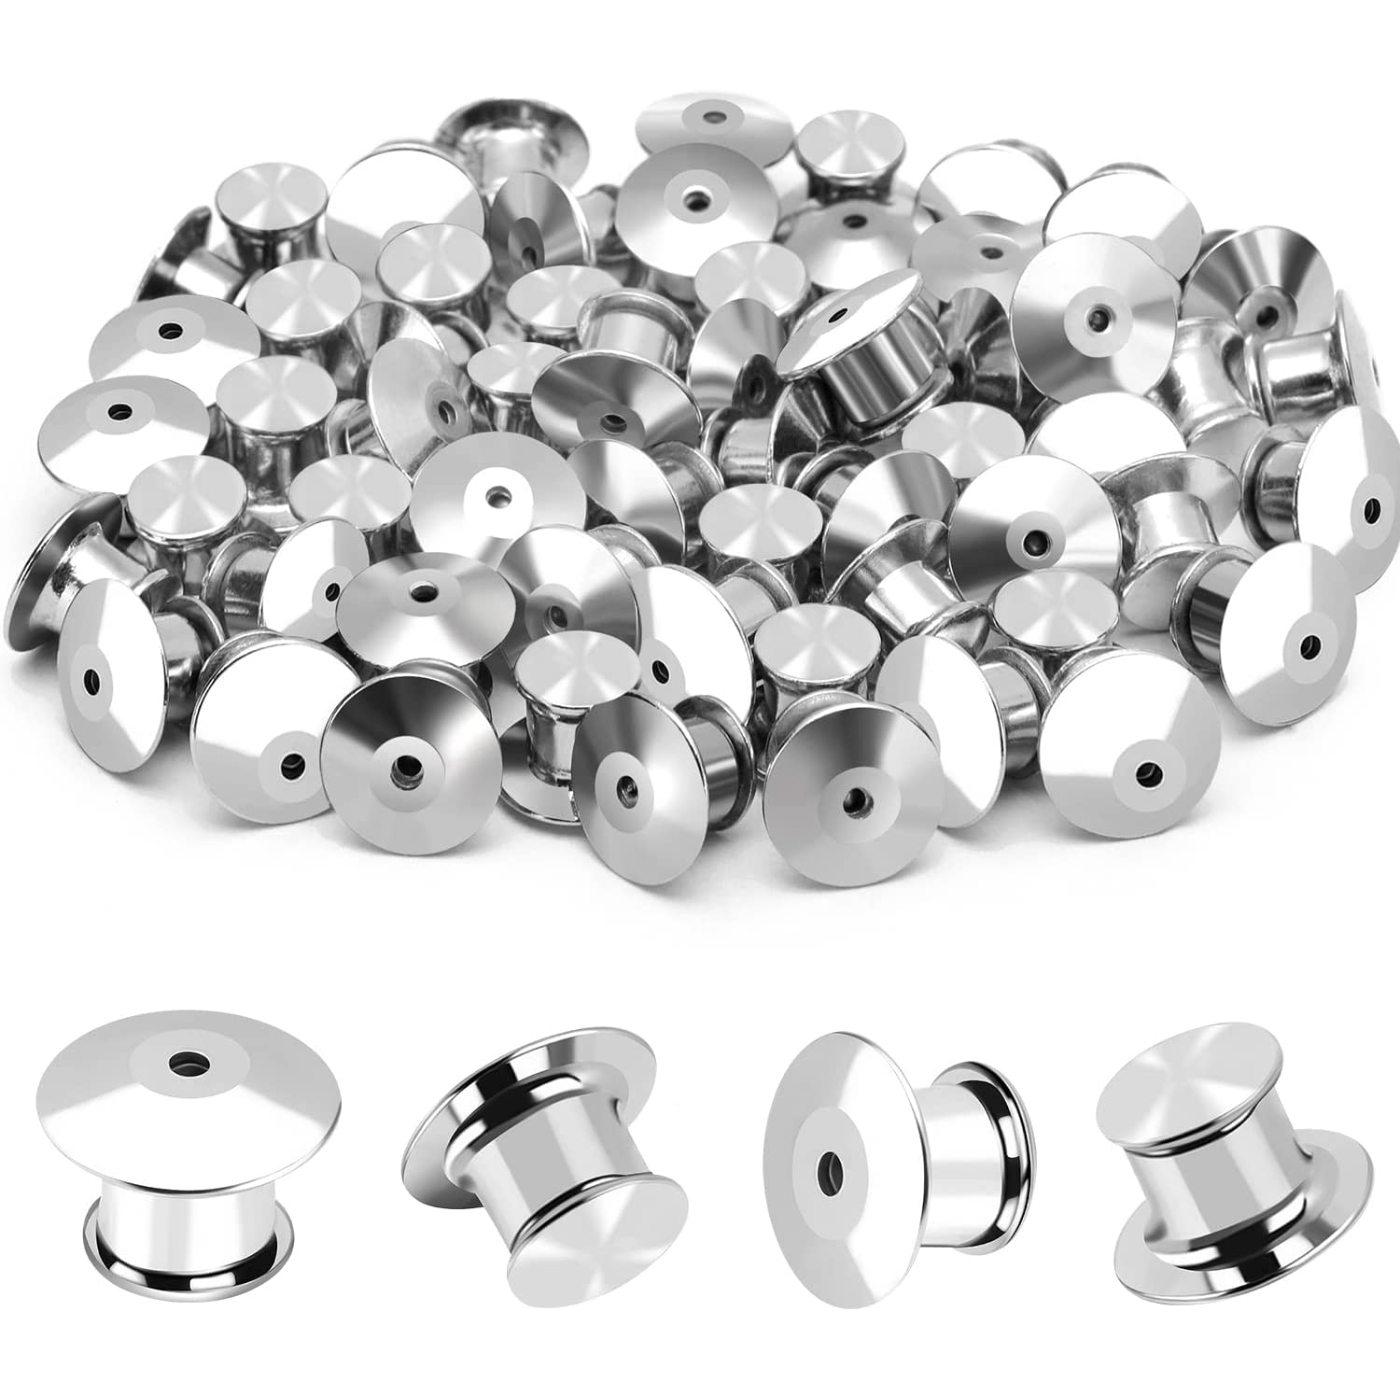 50pcs Metal Pin Backs Lapel Pin Backs Locking Clasp Butterfly Clutch Tie  Tacks Pin Back for Brooch Tie Hat Badge Insignia Replacement (Silver)